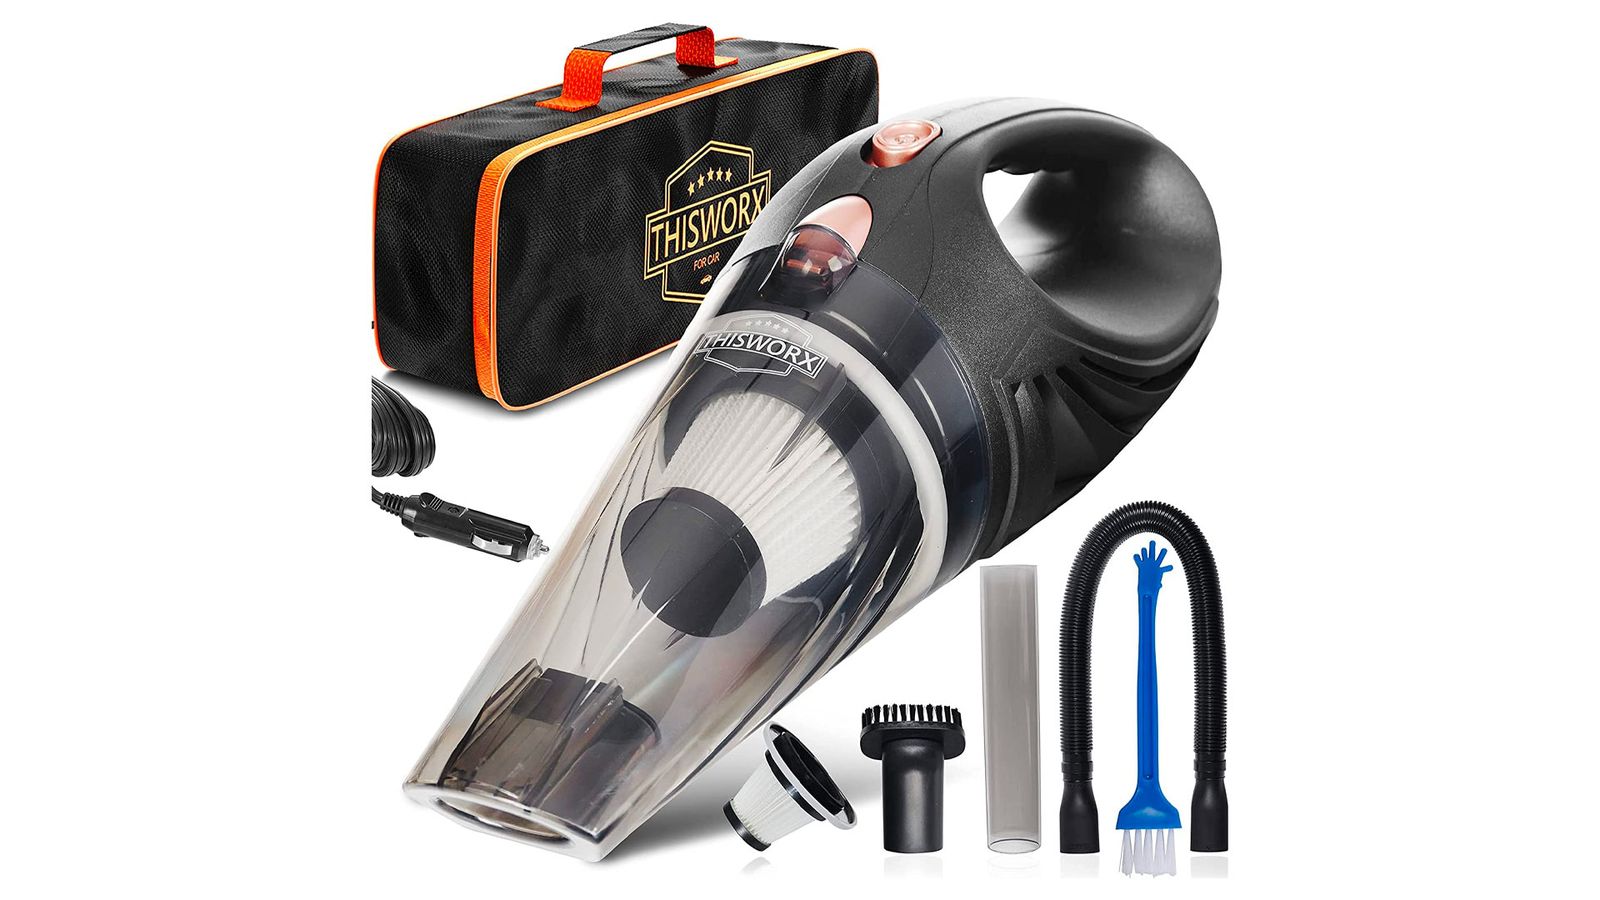 ThisWorx Car Vacuum Cleaner product image of a black handheld device with a clear front and a black and orange carry bag.